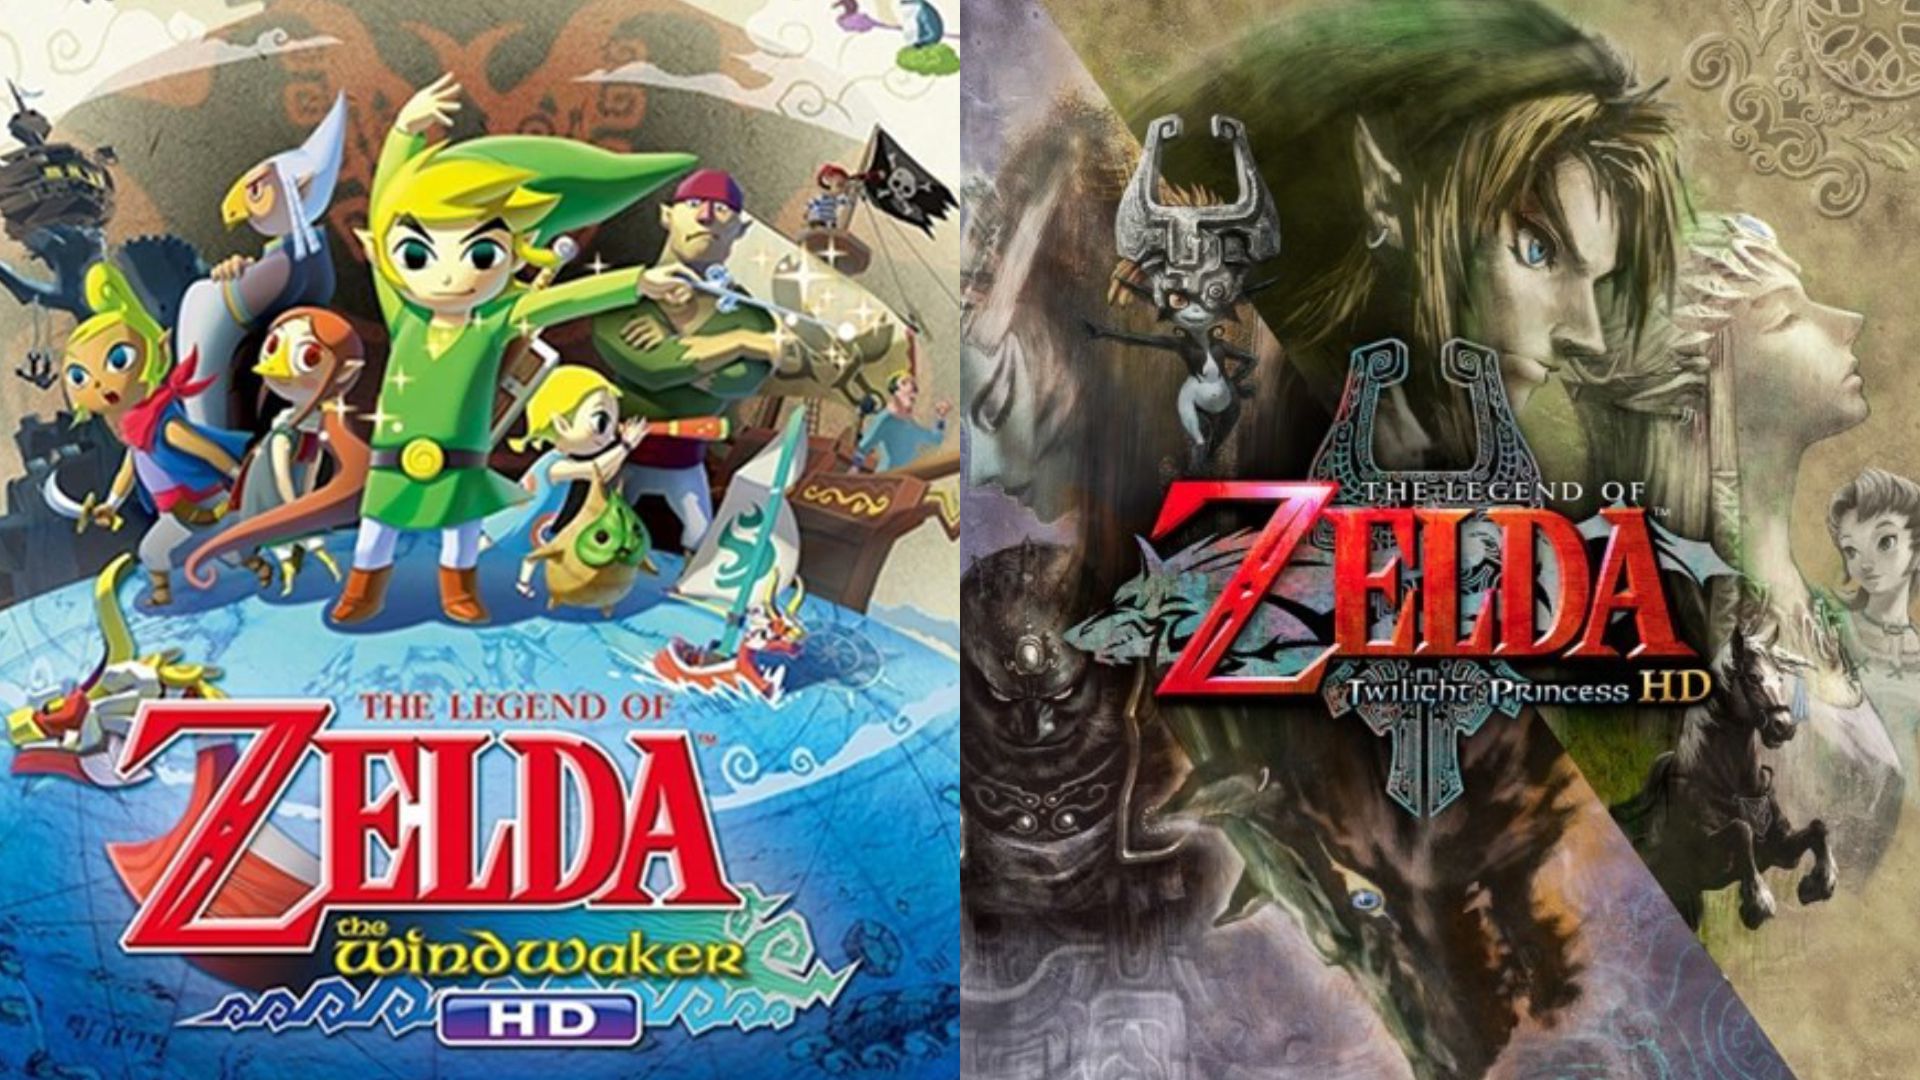 Wind Waker and Twilight Princess are coming to Switch this year